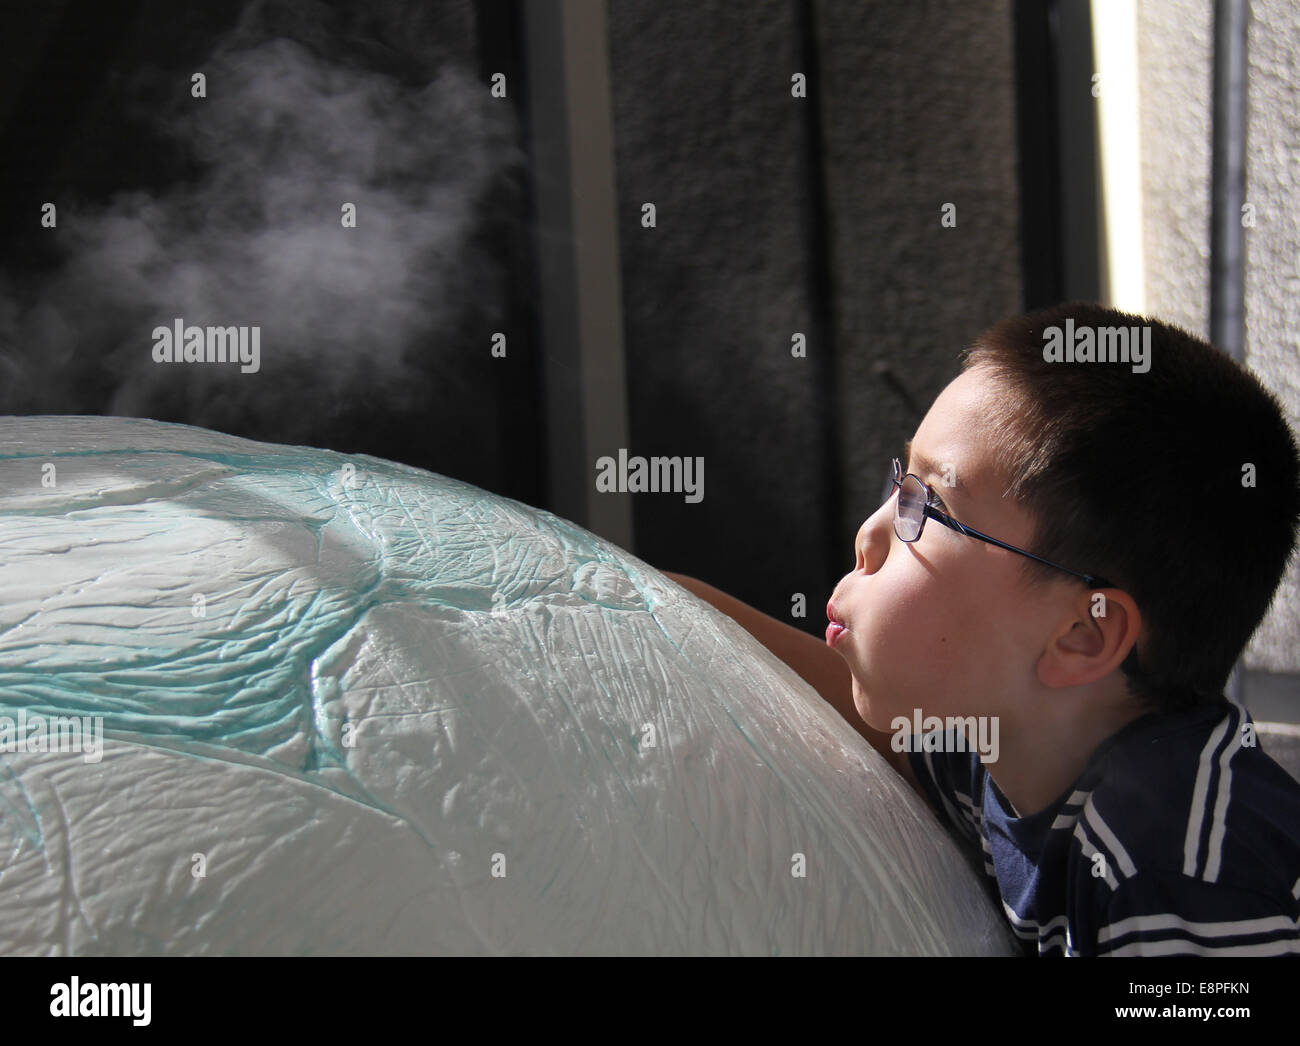 Los Angeles, USA. 12th Oct, 2014. A boy watches the mist spewed by the model of 'Moon of Saturn(Enceladus)' at NASA's Jet Propulsion Laboratory in Los Angeles, the United States, on Oct. 12, 2014. More than 50,000 people visited NASA's Jet Propulsion Laboratory during the annual open days from Oct. 11 to 12. Credit:  Yang Lei/Xinhua/Alamy Live News Stock Photo